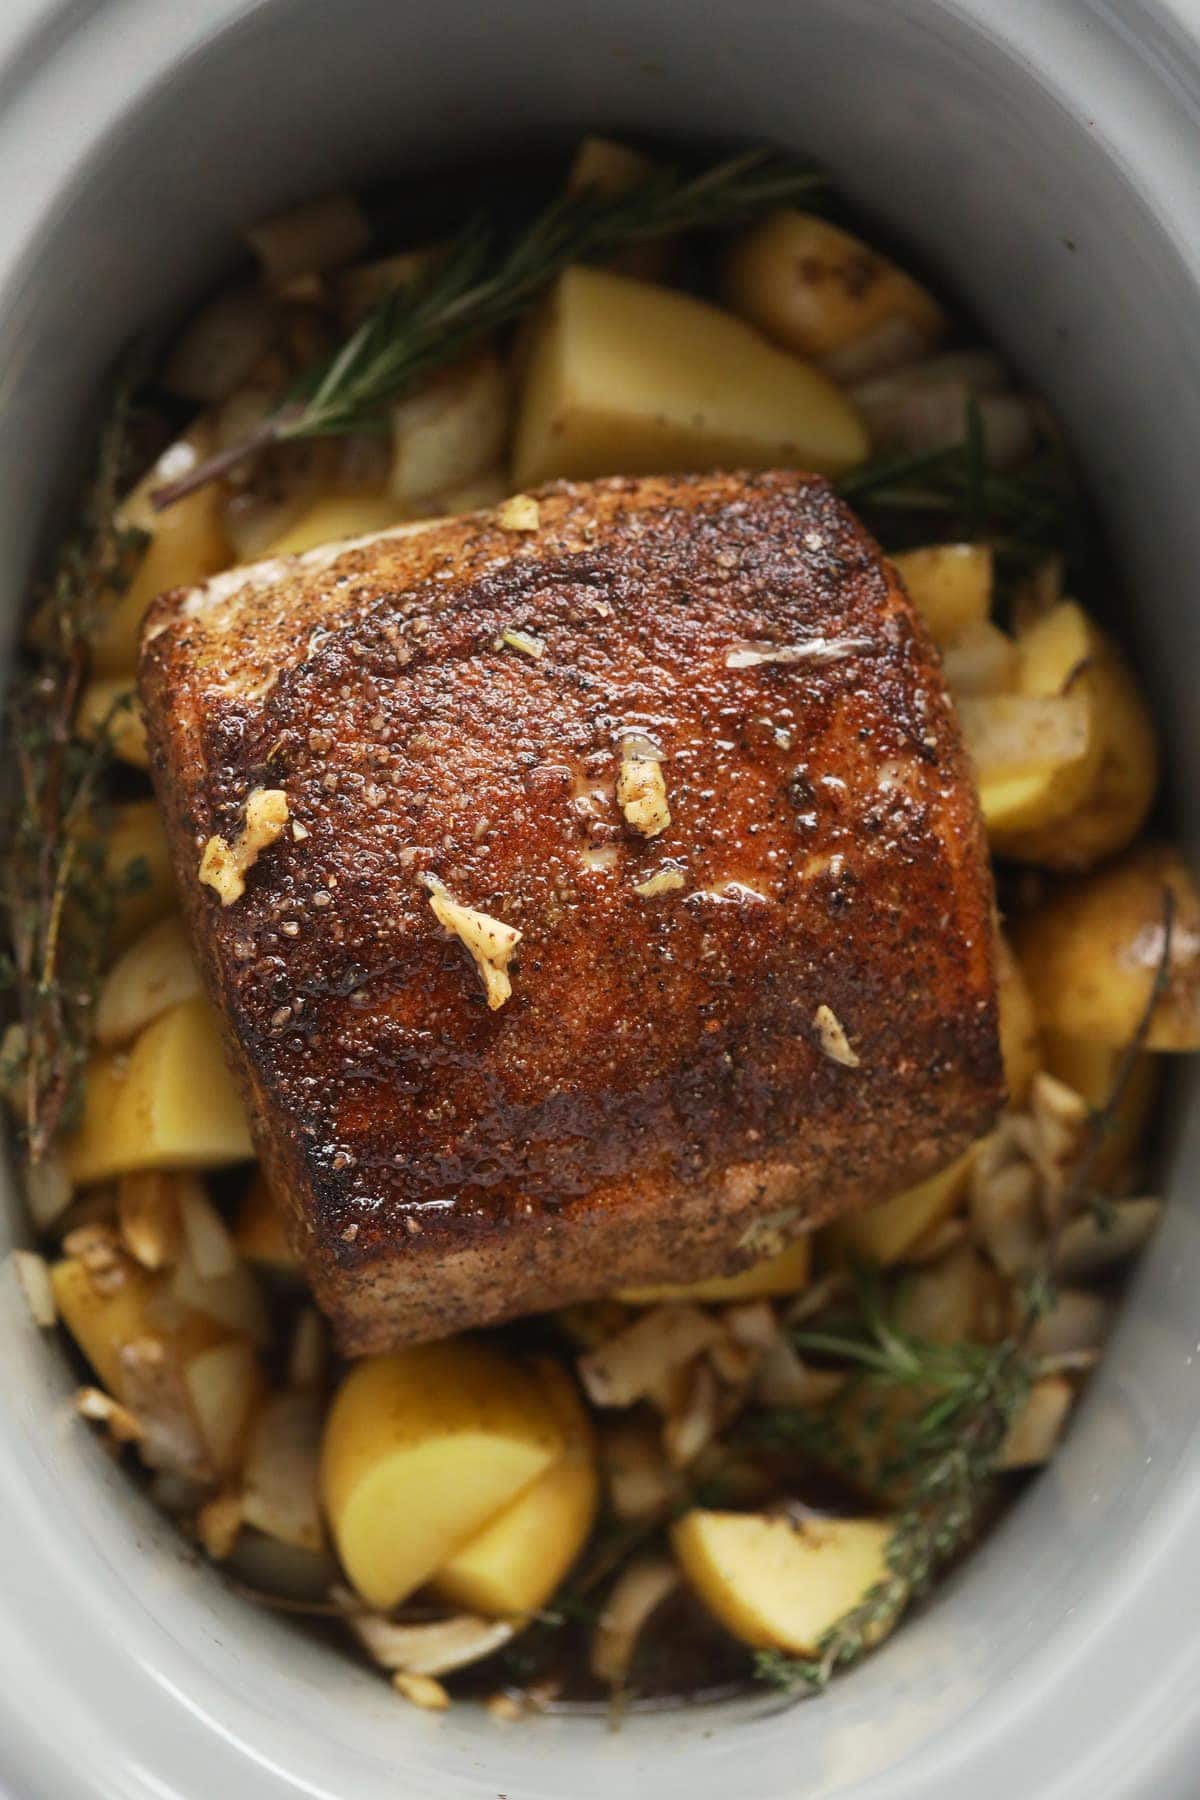 slow cooker pork loin roast on a bed of potatoes and herbs in the slow cooker.